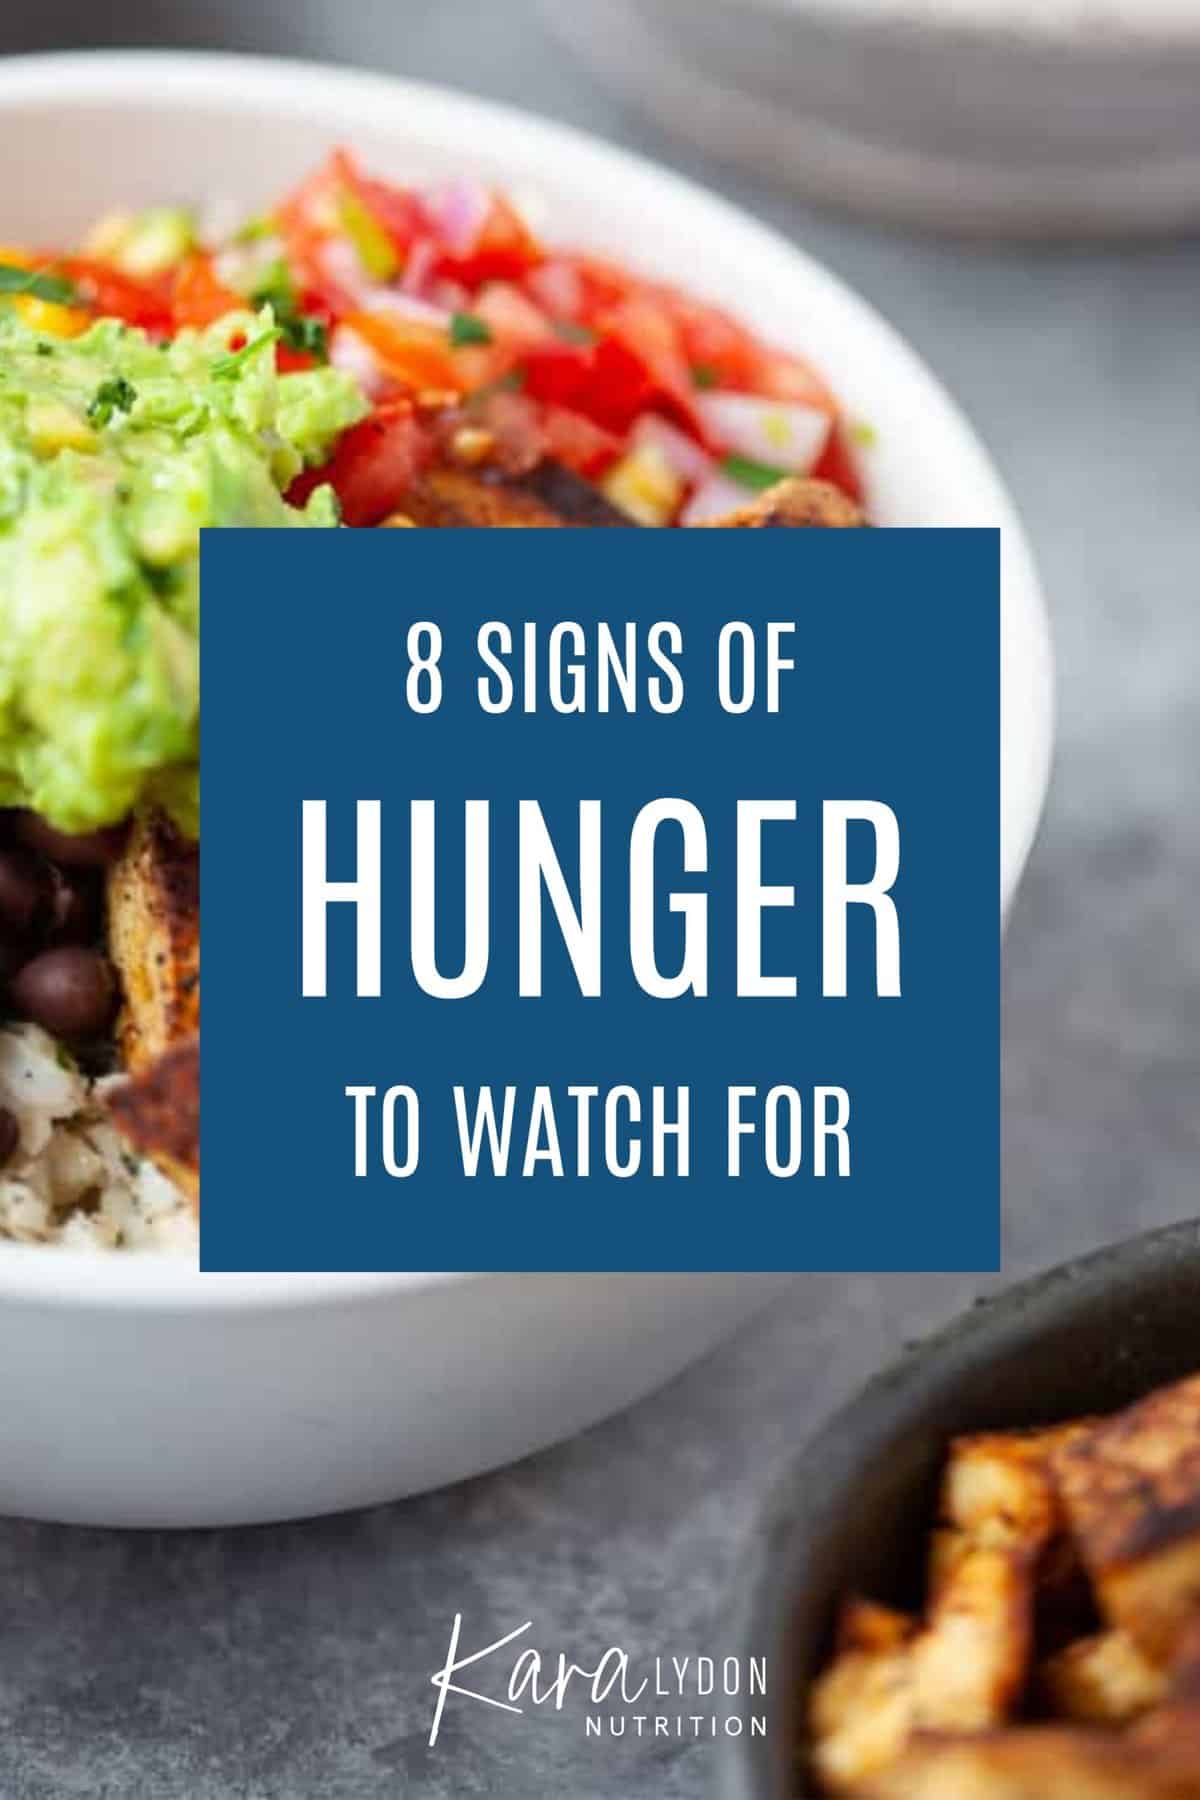 Am I hungry? Signs of hunger to watch for